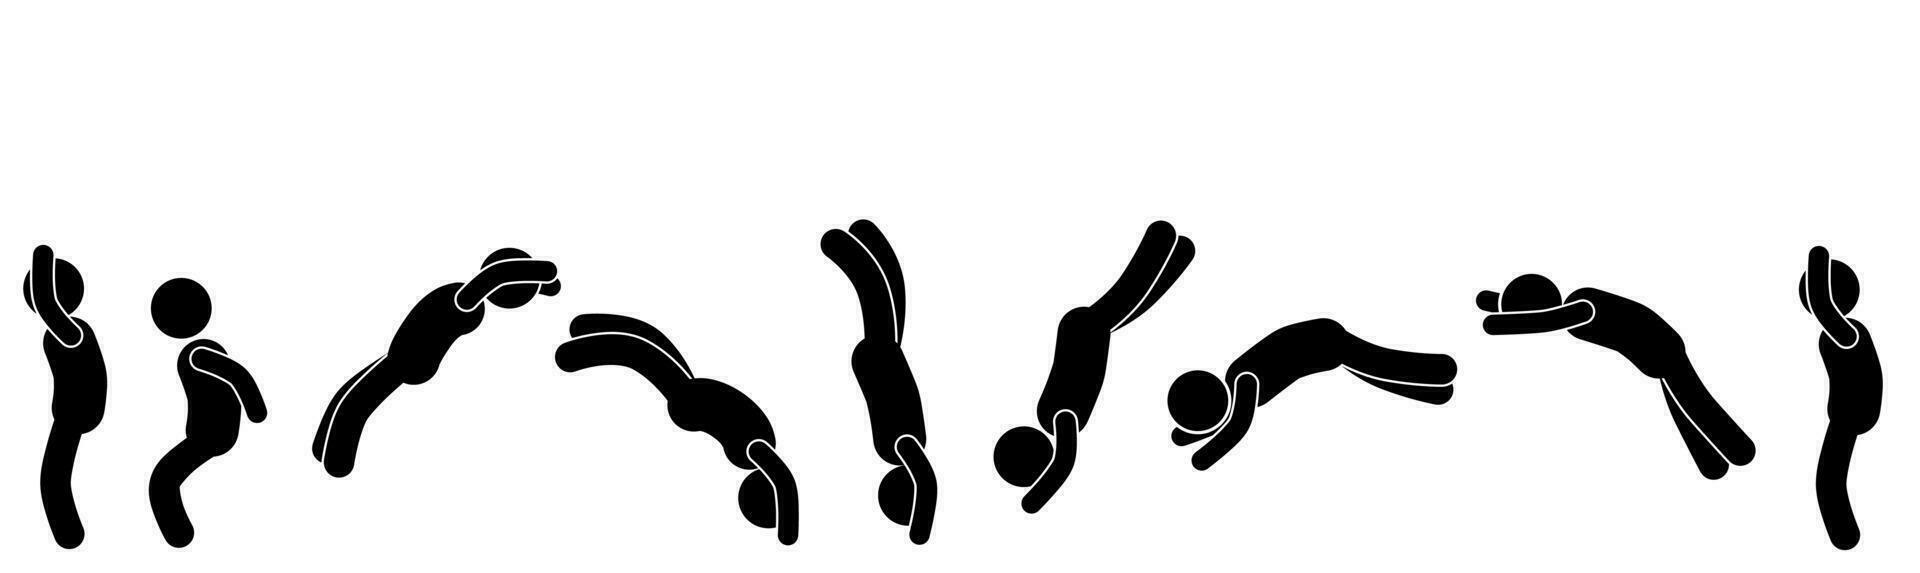 illustration of a man doing a back flip and a front flip. stick figures vector